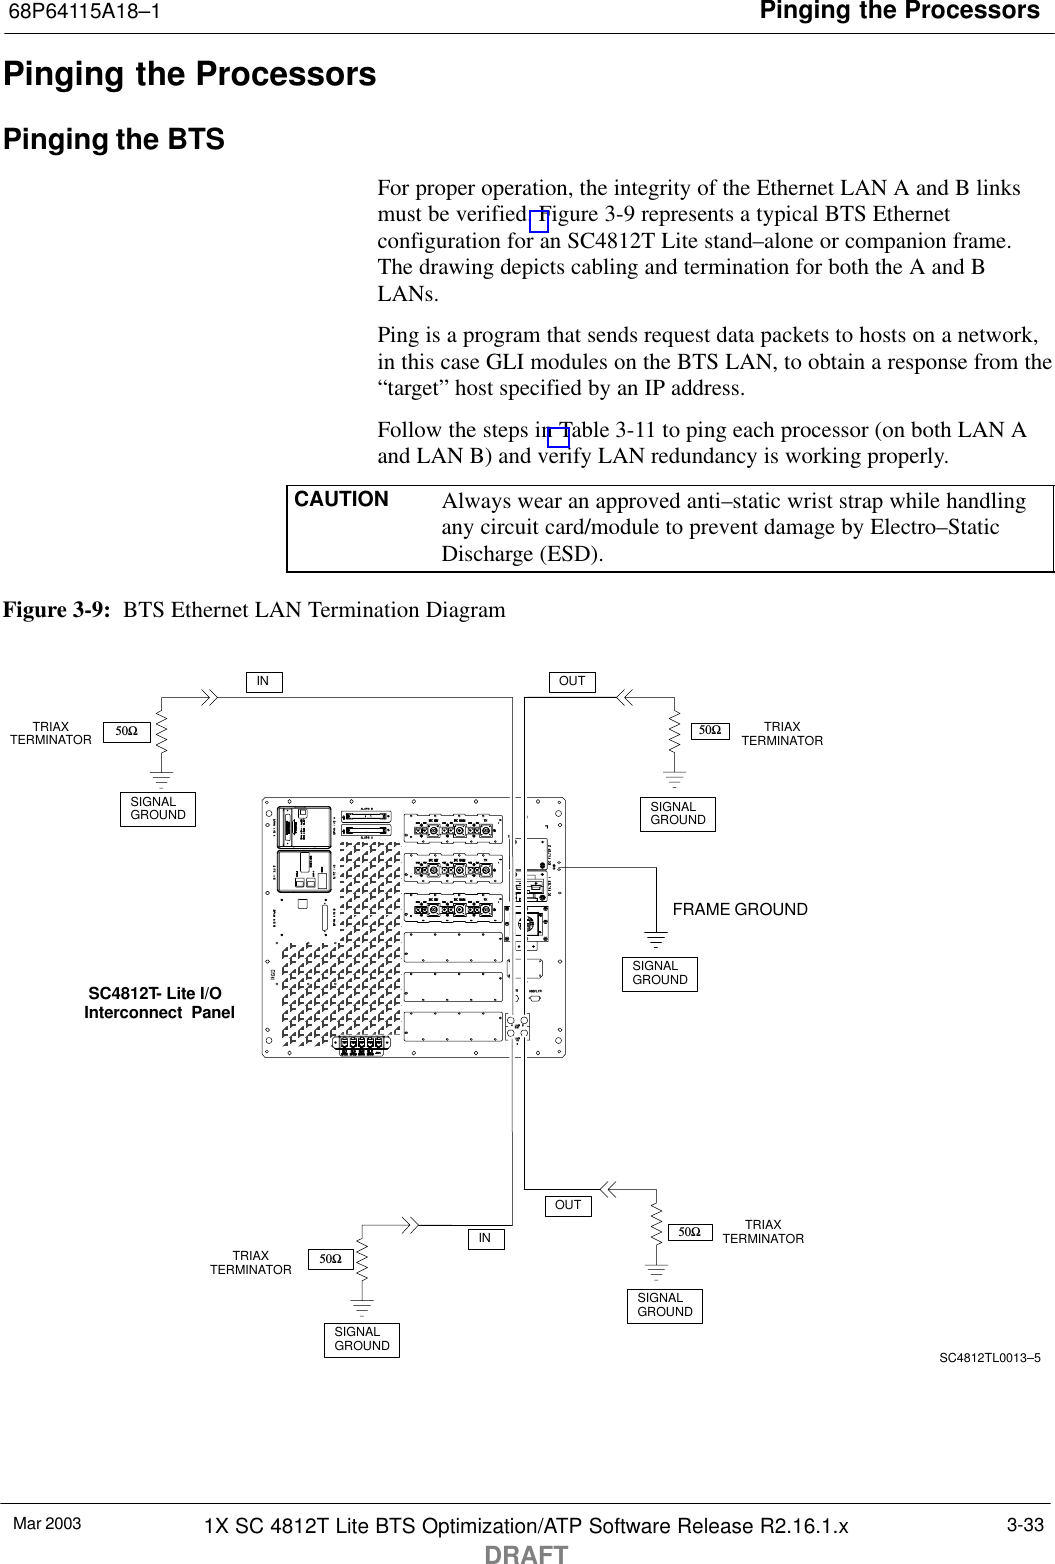 Pinging the Processors68P64115A18–1Mar 2003 1X SC 4812T Lite BTS Optimization/ATP Software Release R2.16.1.xDRAFT3-33Pinging the ProcessorsPinging the BTSFor proper operation, the integrity of the Ethernet LAN A and B linksmust be verified. Figure 3-9 represents a typical BTS Ethernetconfiguration for an SC4812T Lite stand–alone or companion frame.The drawing depicts cabling and termination for both the A and BLANs.Ping is a program that sends request data packets to hosts on a network,in this case GLI modules on the BTS LAN, to obtain a response from the“target” host specified by an IP address.Follow the steps in Table 3-11 to ping each processor (on both LAN Aand LAN B) and verify LAN redundancy is working properly.CAUTION Always wear an approved anti–static wrist strap while handlingany circuit card/module to prevent damage by Electro–StaticDischarge (ESD).Figure 3-9:  BTS Ethernet LAN Termination DiagramSIGNALGROUNDSIGNALGROUND50ΩINSIGNALGROUND50Ω50ΩSIGNALGROUND50ΩSIGNALGROUNDFRAME GROUNDTRIAXTERMINATORTRIAXTERMINATORTRIAXTERMINATORINOUTOUTSC4812TL0013–5TRIAXTERMINATORSC4812T- Lite I/O  Interconnect  Panel